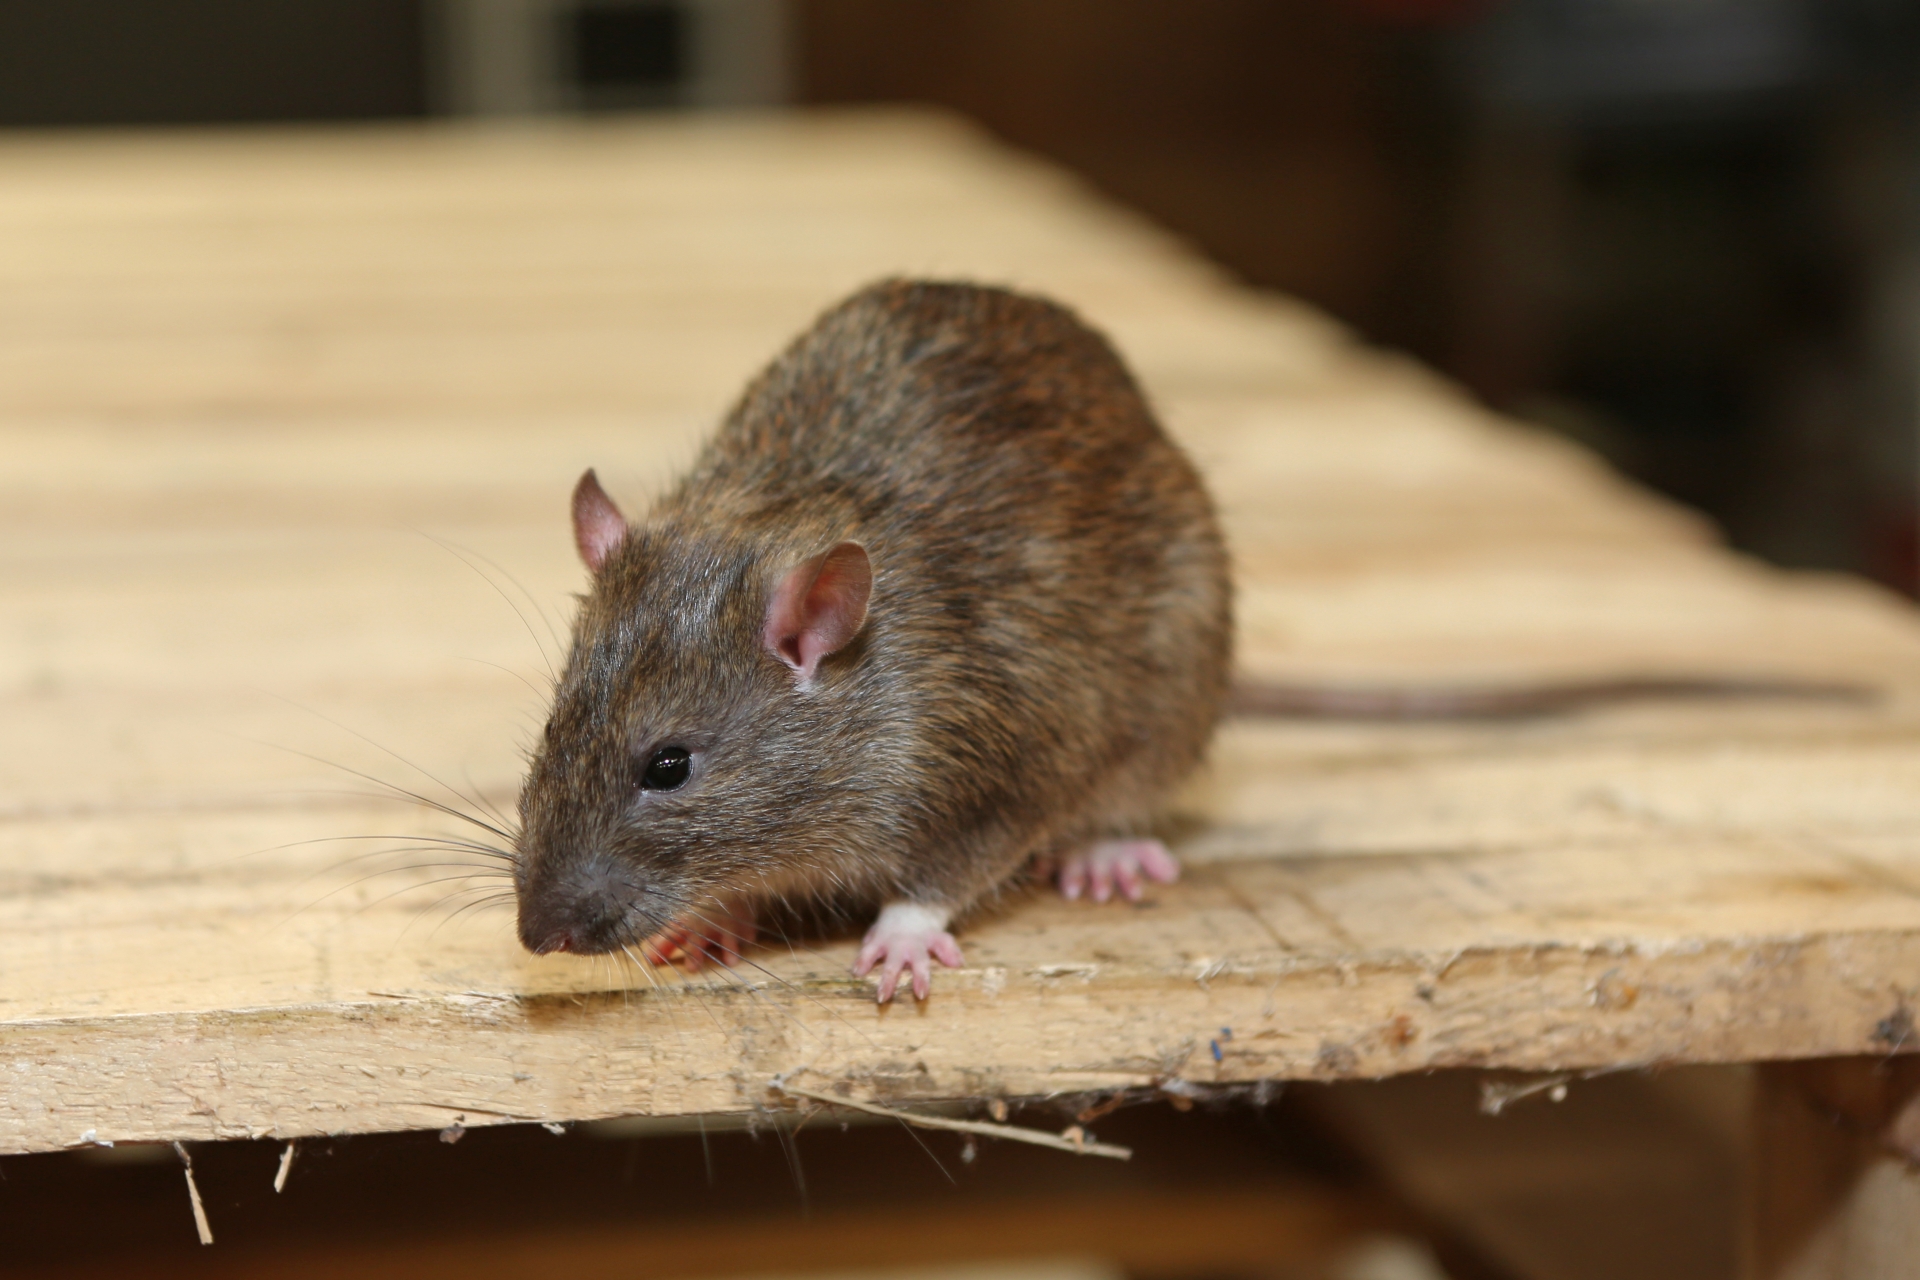 Rat Control, Pest Control in Havering-atte-Bower, Abridge, RM4. Call Now 020 8166 9746